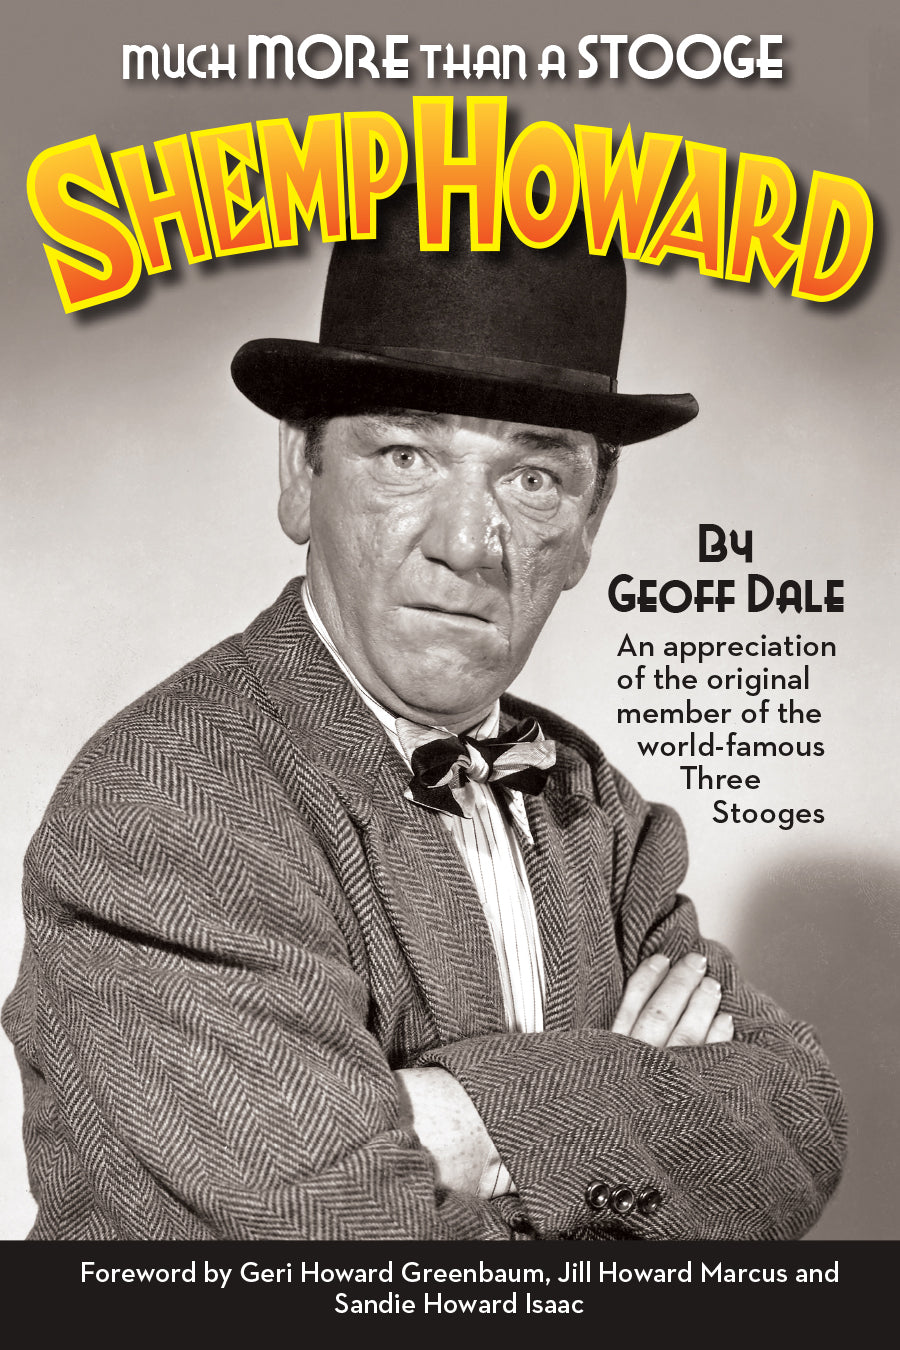 Much More Than A Stooge: Shemp Howard (ebook)